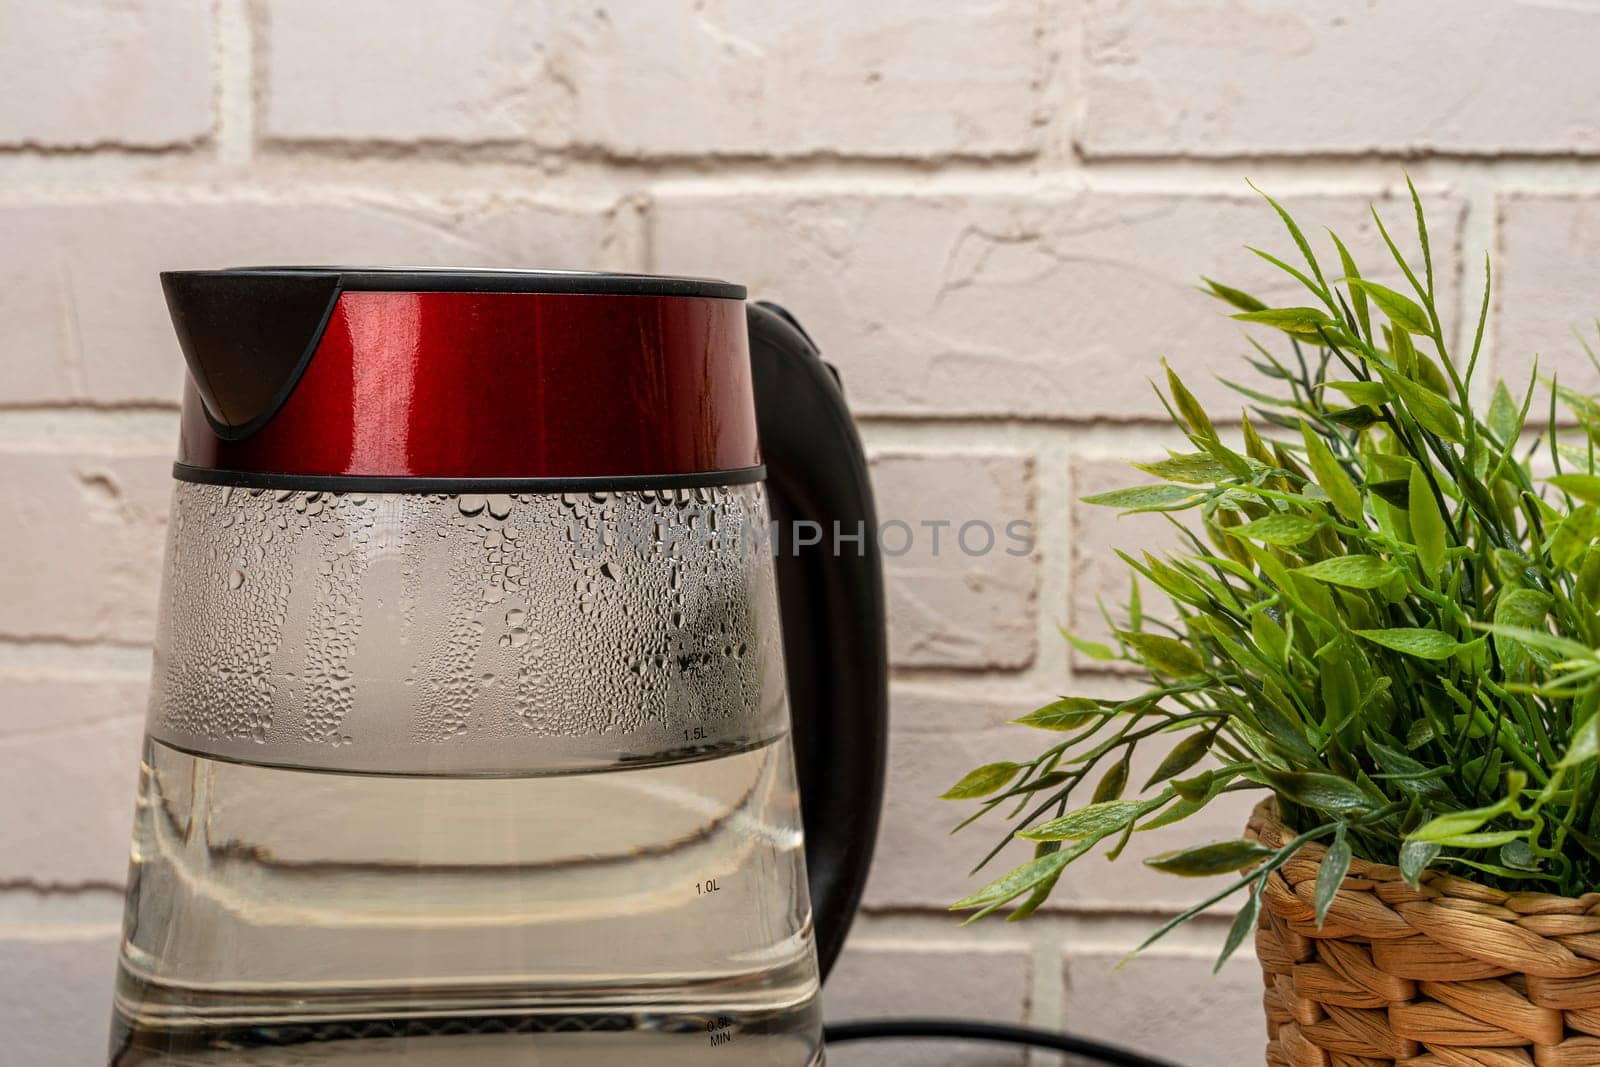 a new modern electric kettle made of heat-resistant glass in close-up with condensation drops on the walls against a light brick wall and a green flower in a pot